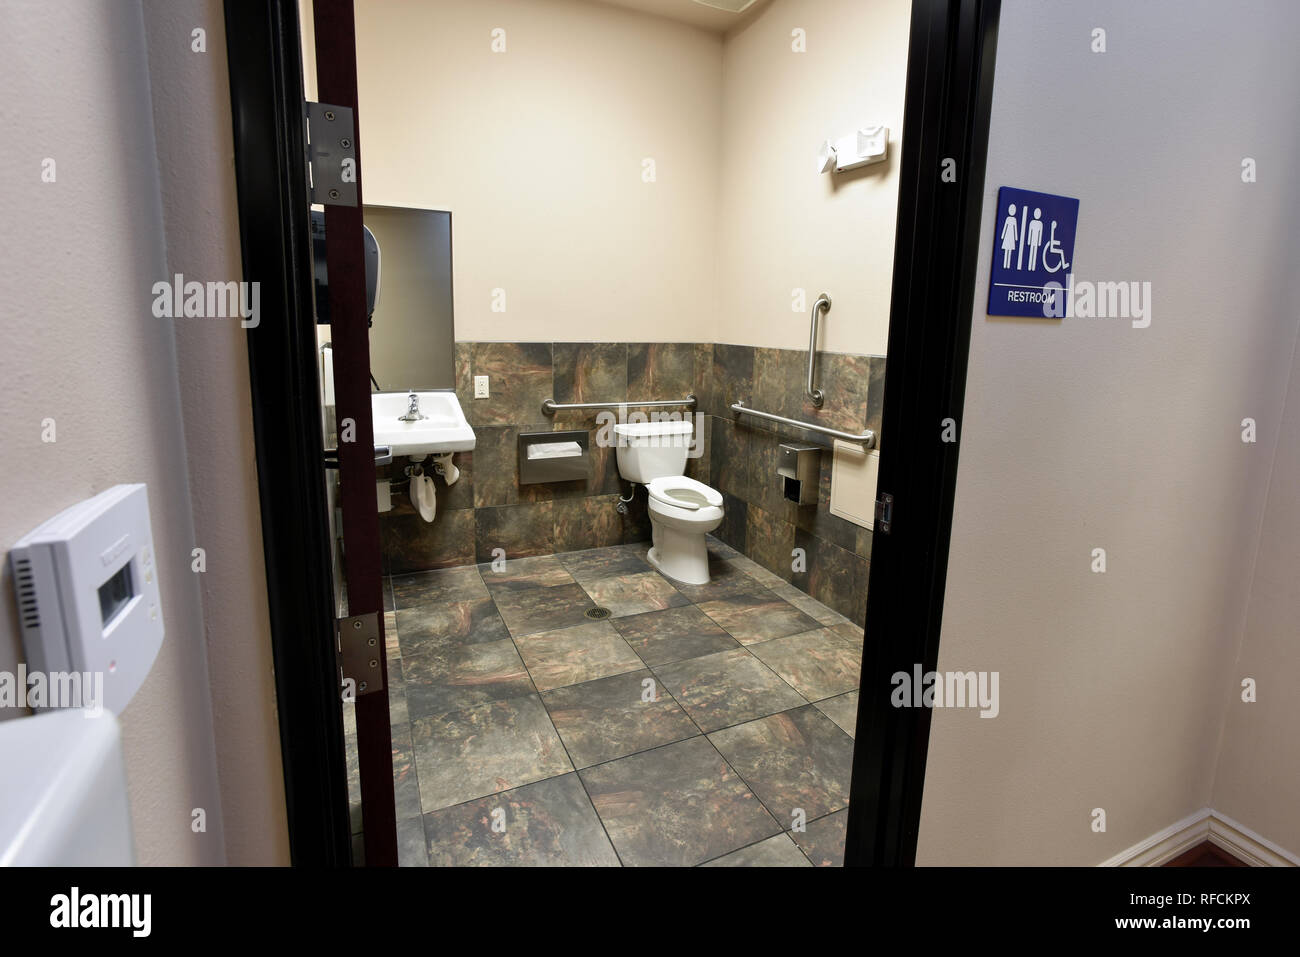 Commercial business bathroom. Stock Photo